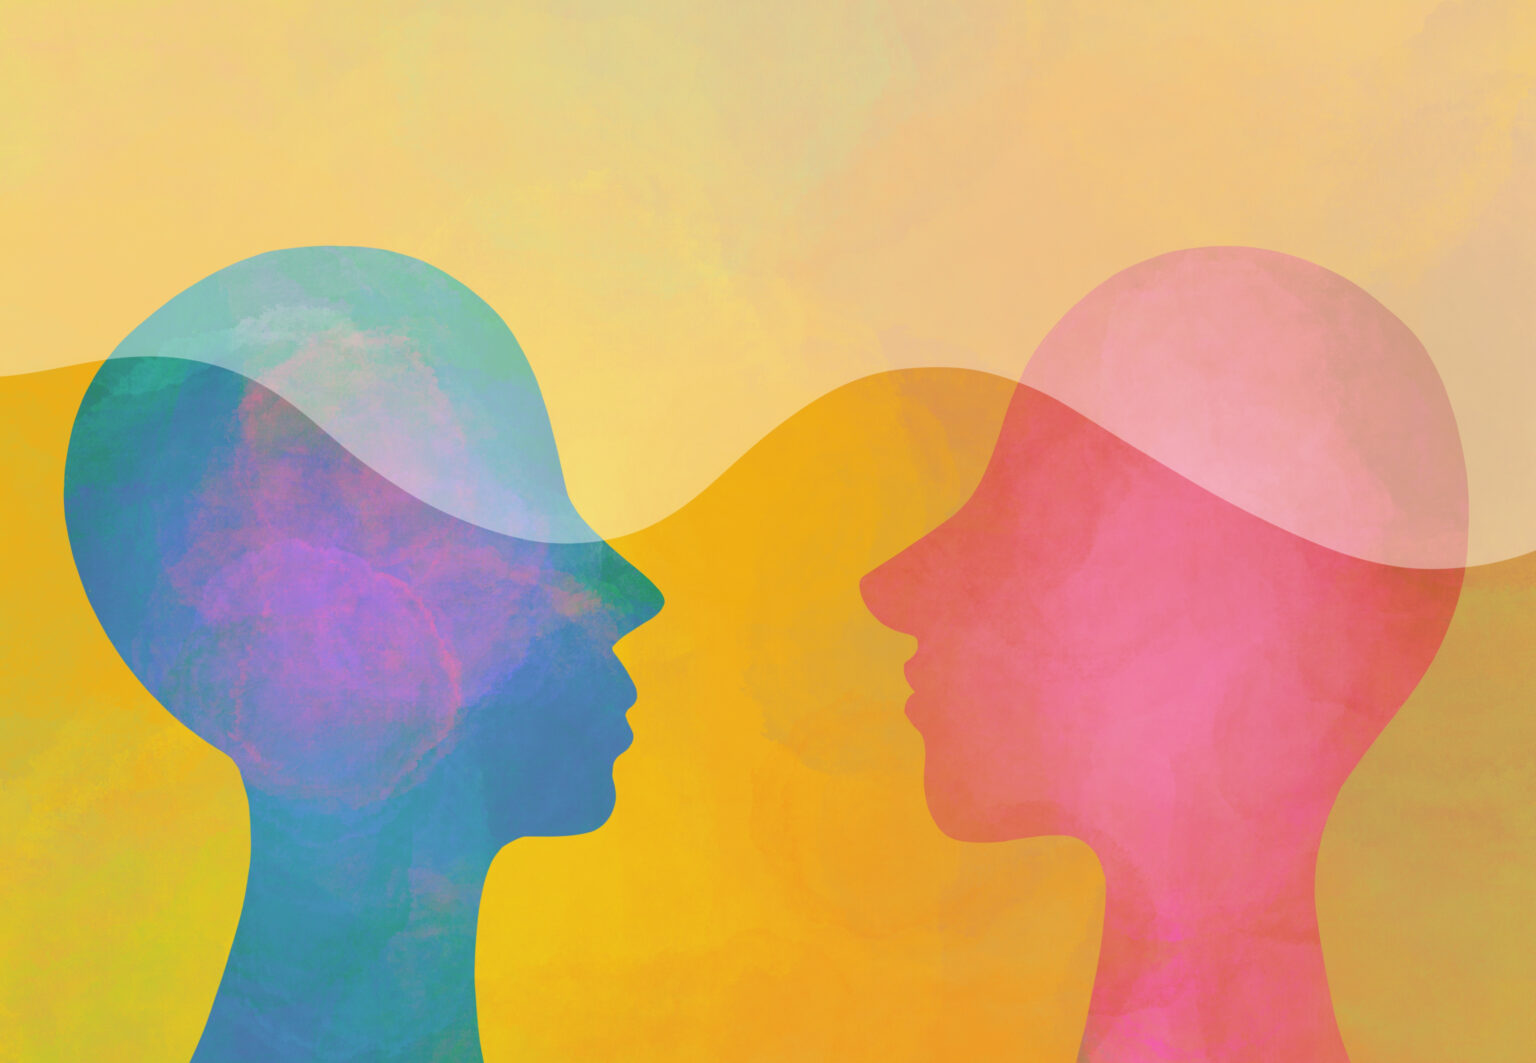 Abstract silhouettes of two individuals' side profiles